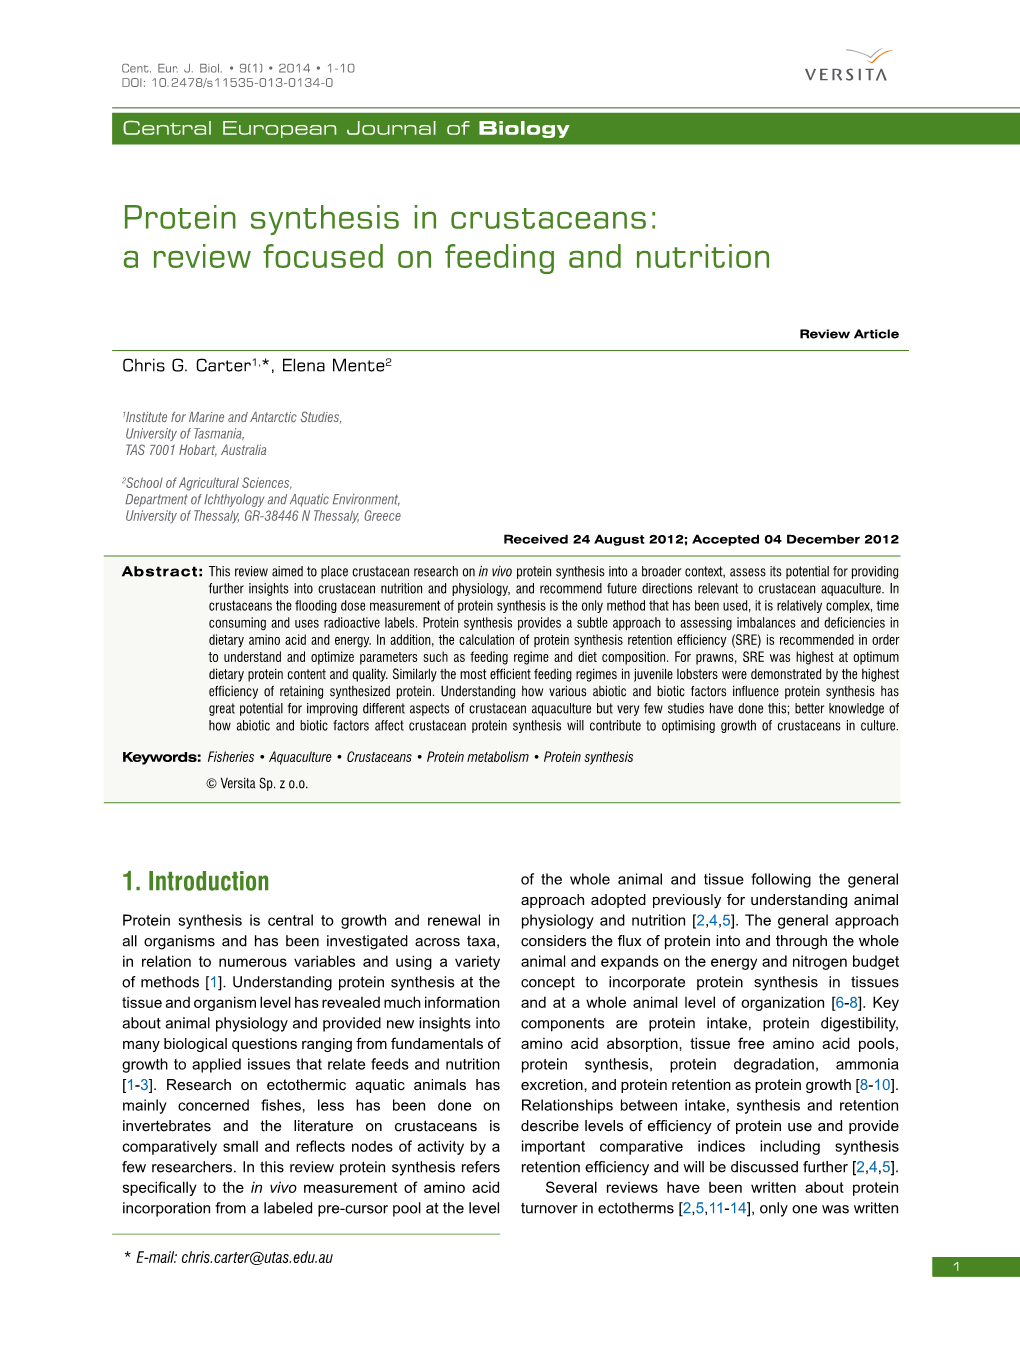 Protein Synthesis in Crustaceans: a Review Focused on Feeding and Nutrition